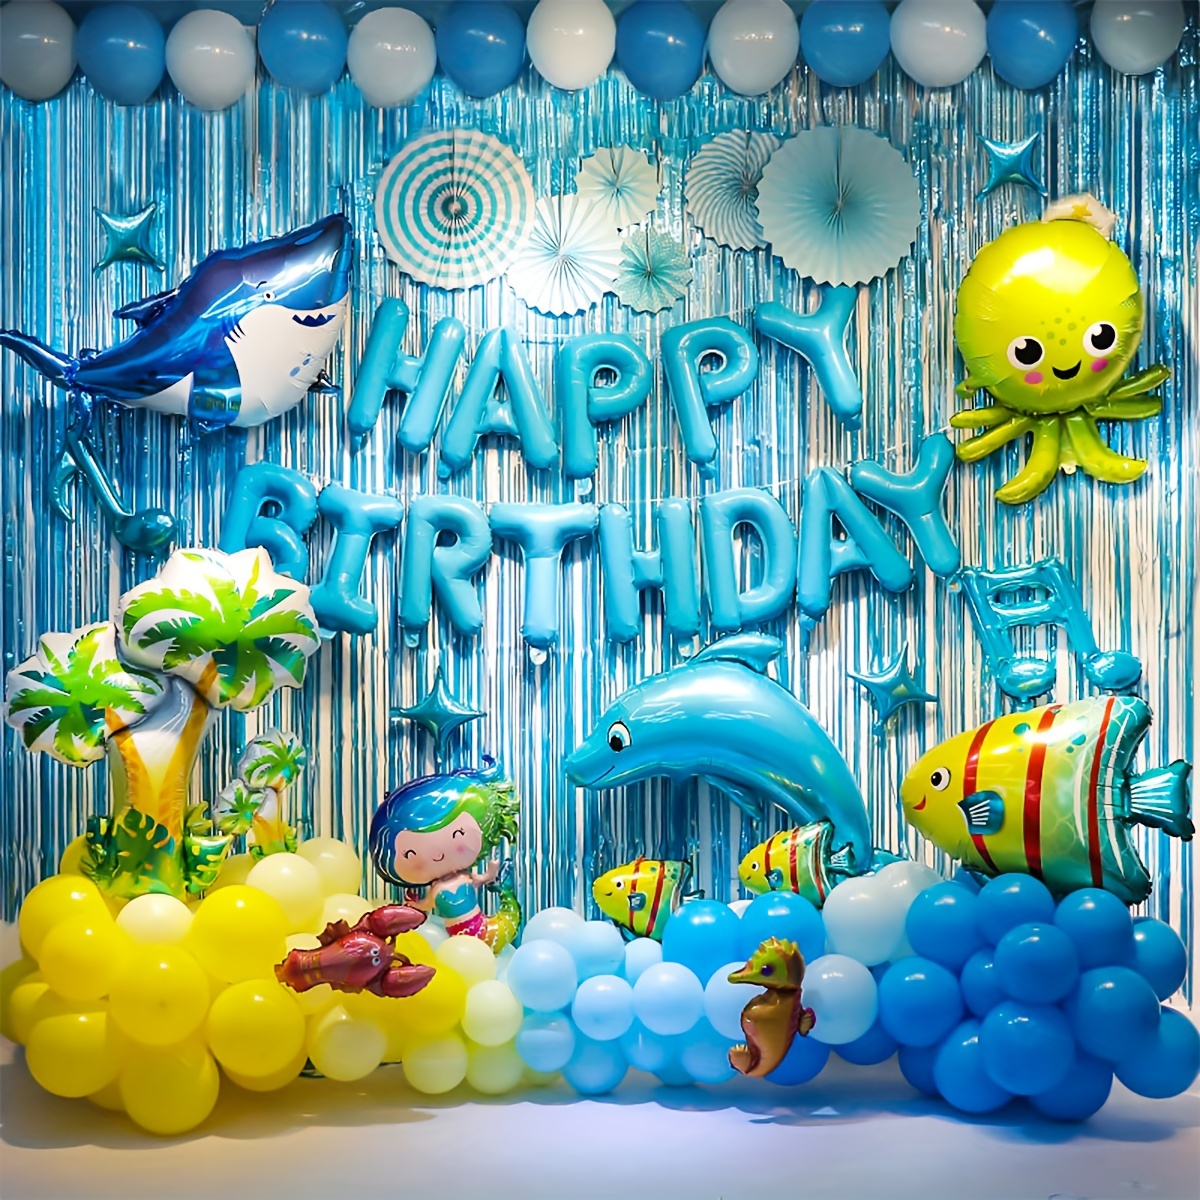 

Ocean Theme Birthday Party Decorations Shark Birthday Party Supplies For Boys - Under The Sea Party Include Sea Animal Balloons Birthday Banner Navy Blue Hanging Paper Fans Latex Balloons